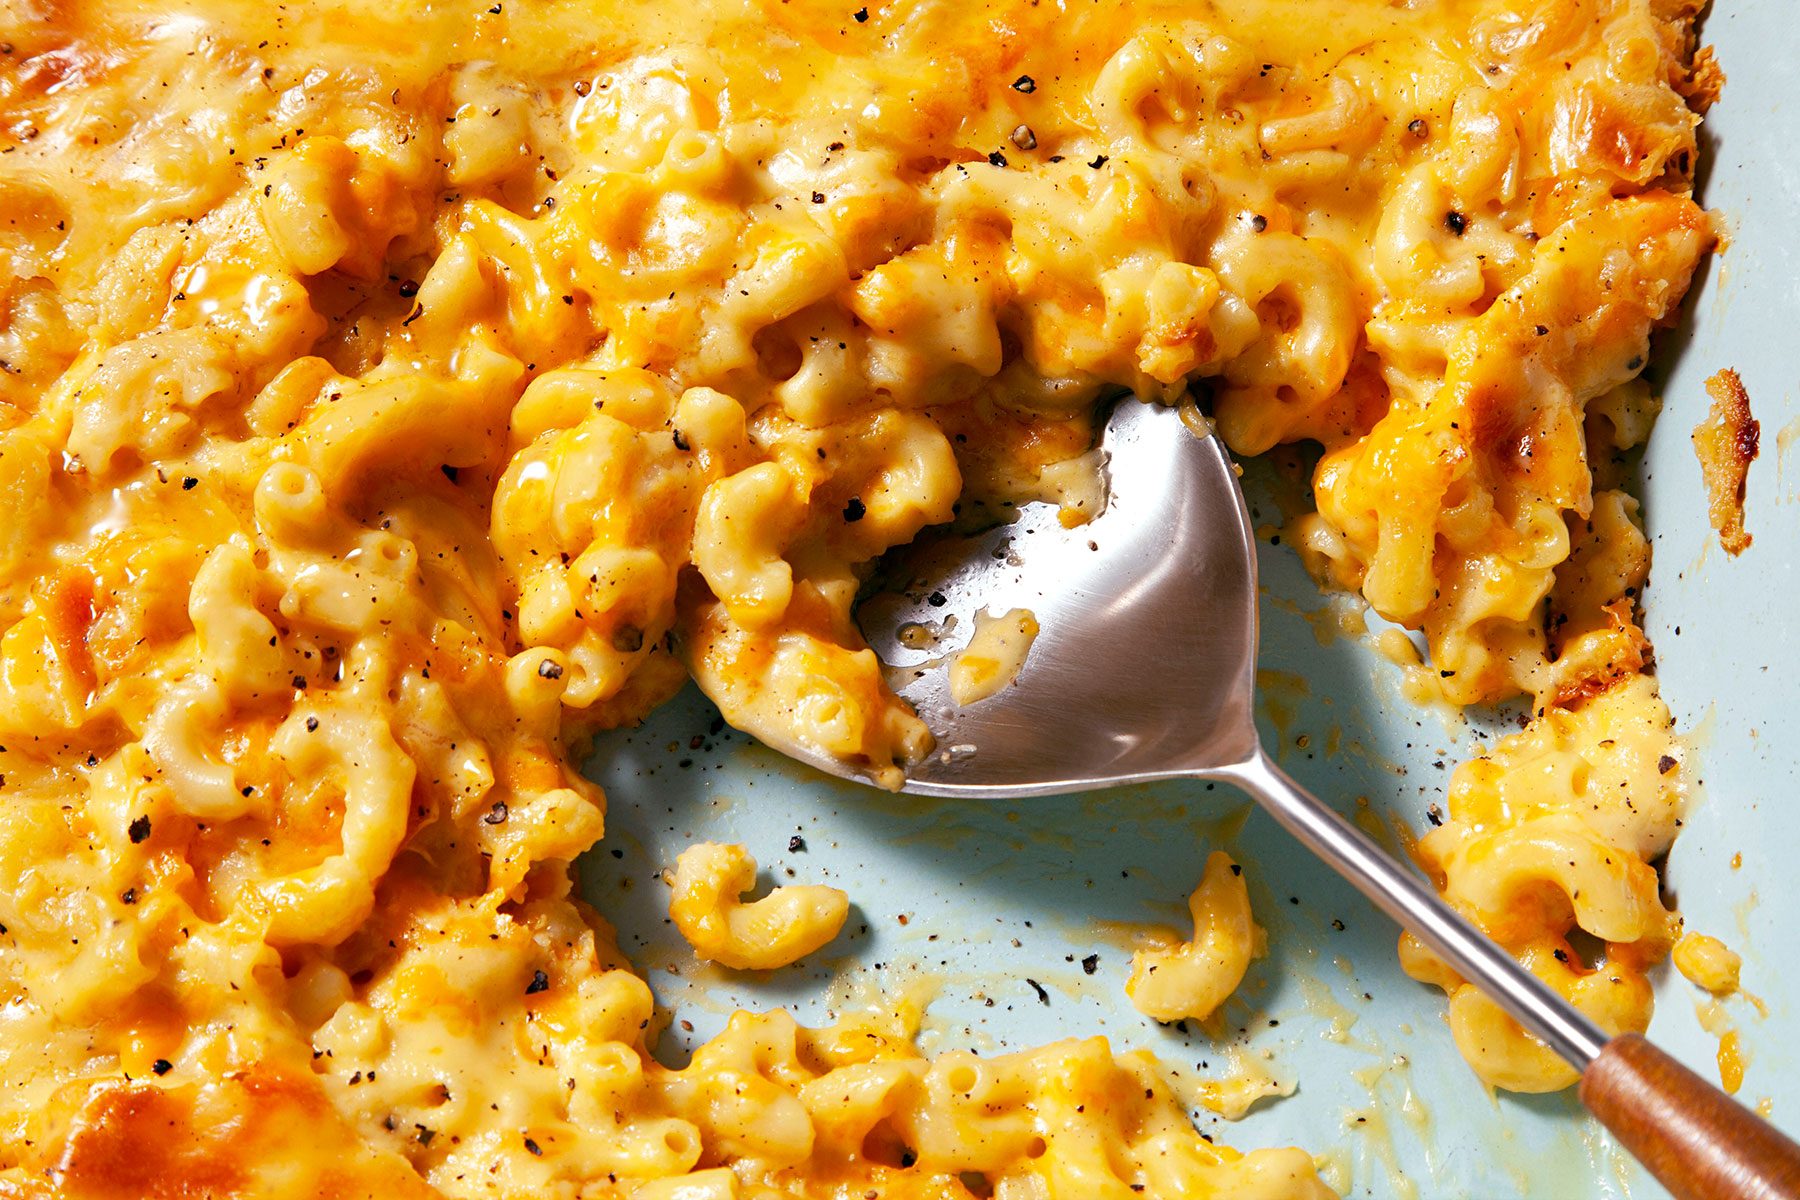 Picking up Creamy Macaroni And Cheese with spoon